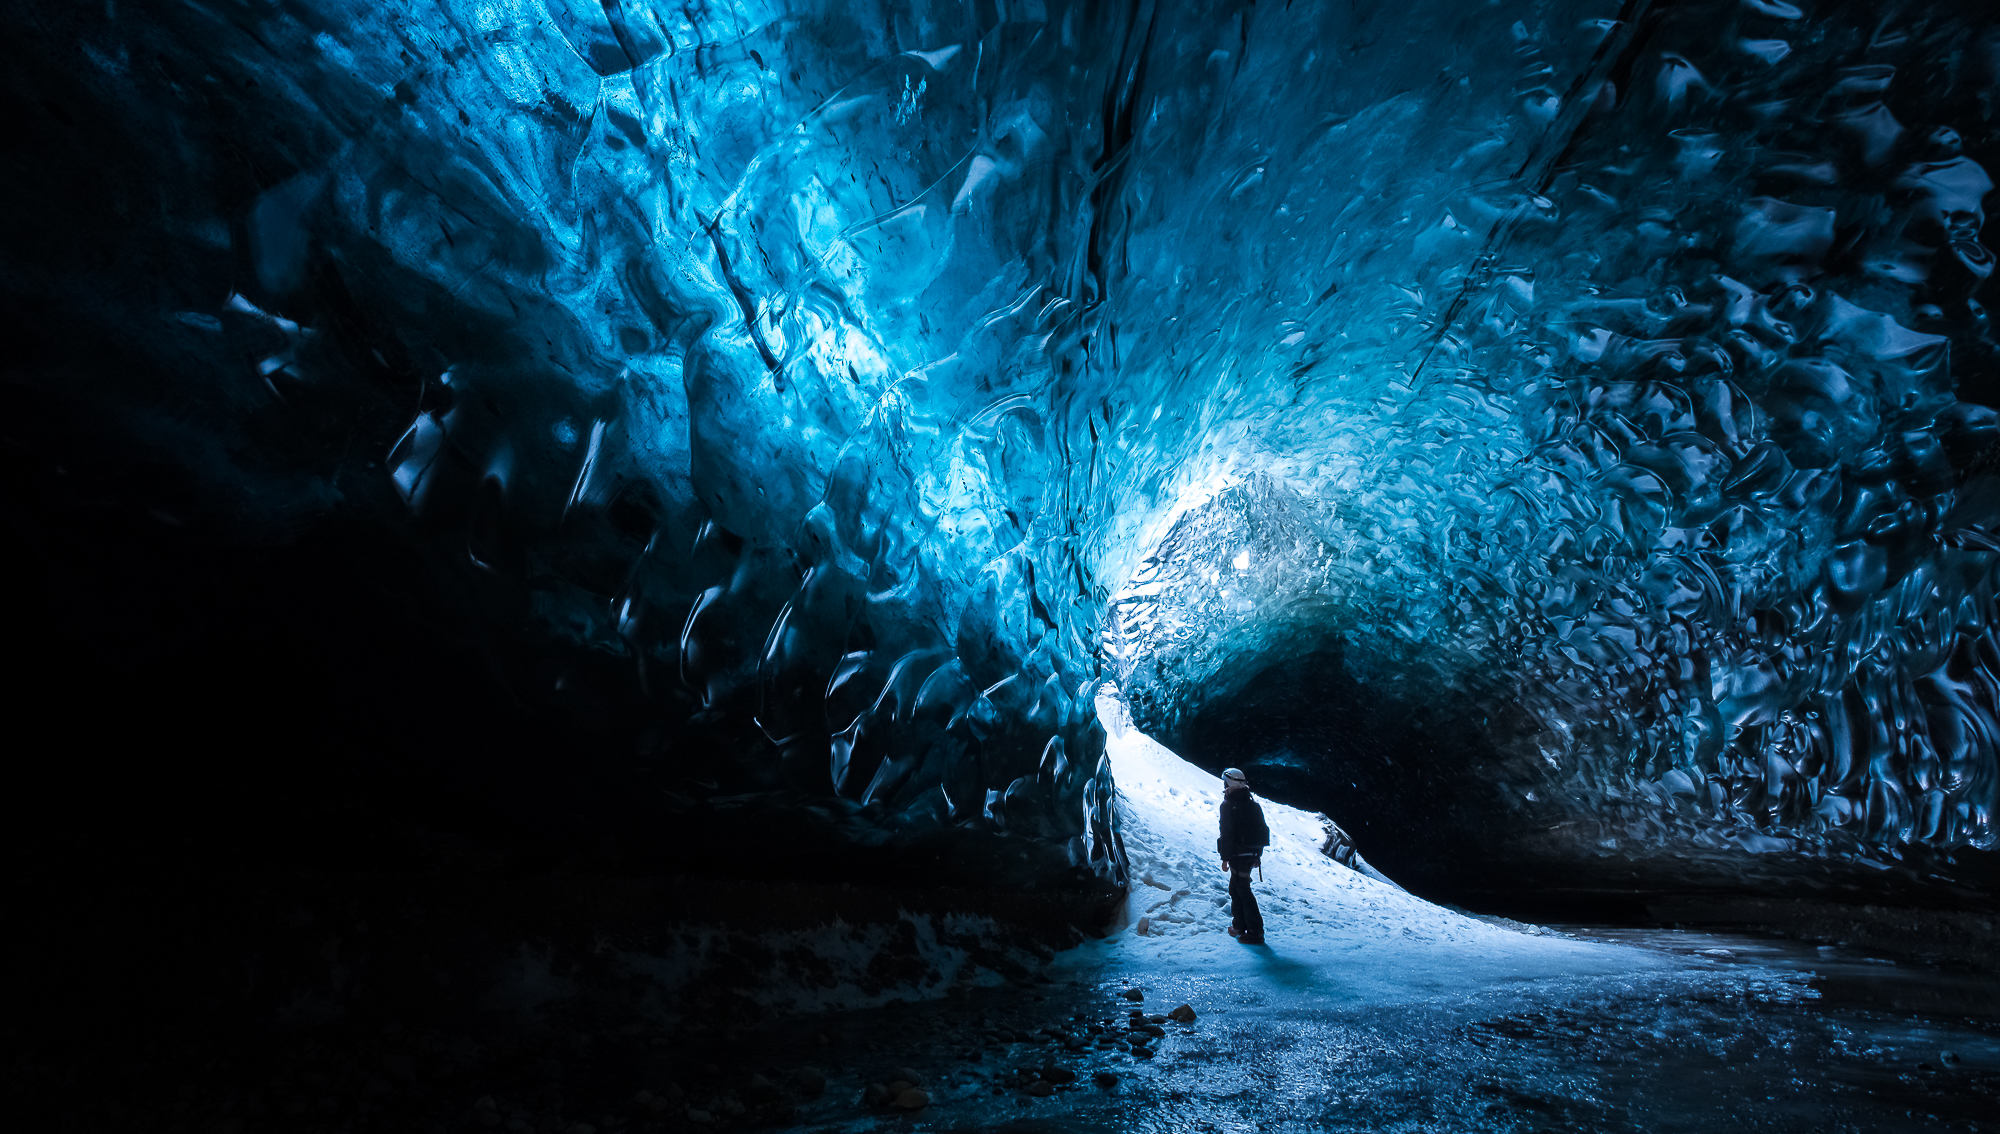 Earth Ice Cave HD Wallpaper Background Image. 